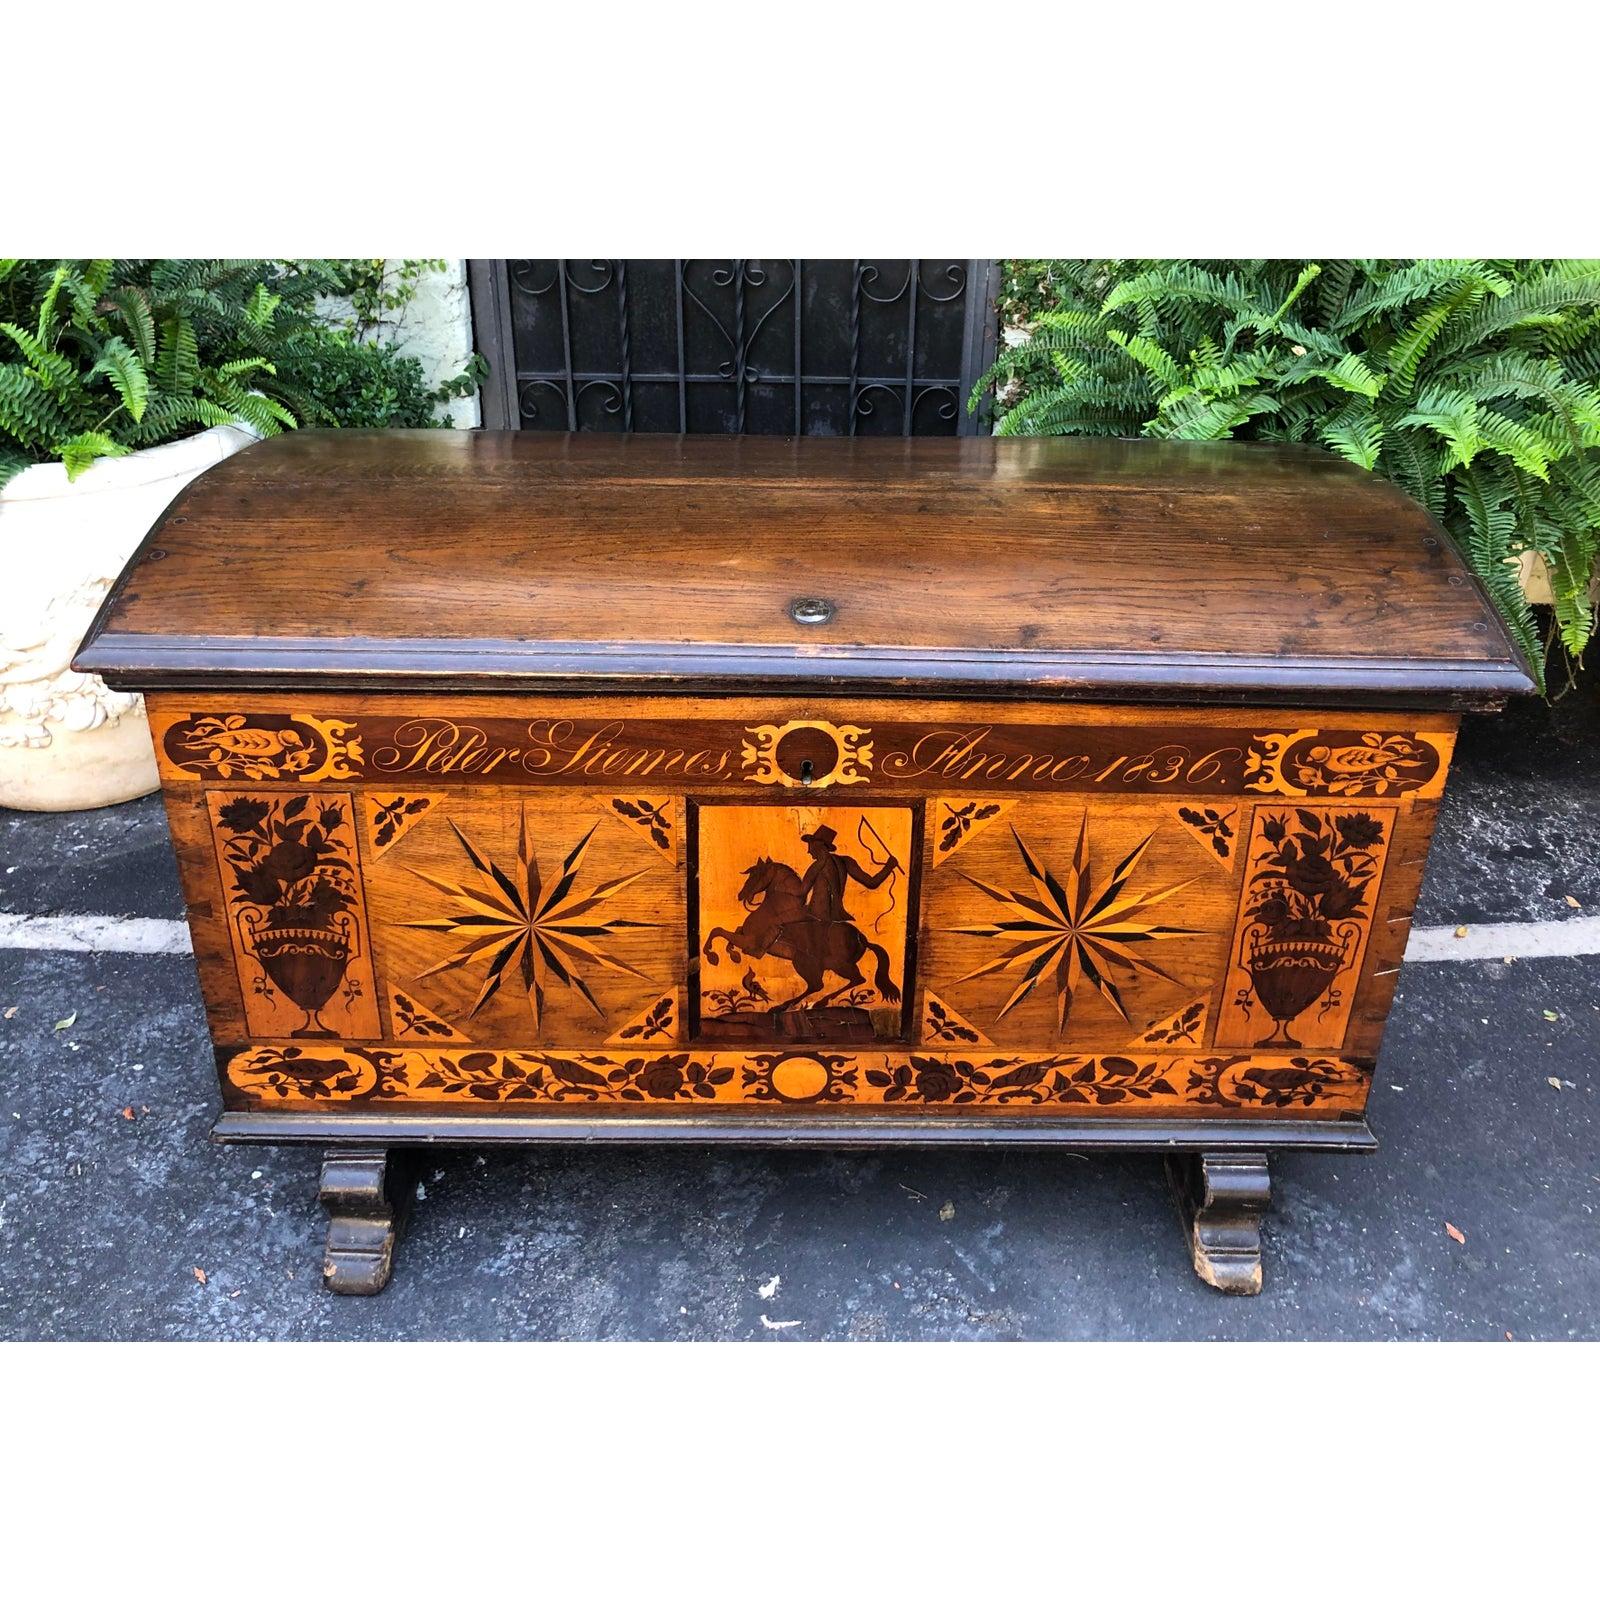 Antique early 19th century Italian inlaid hope chest trunk. Beautifully inlaid decoration including stars and a horse and rider. Dated 1836.